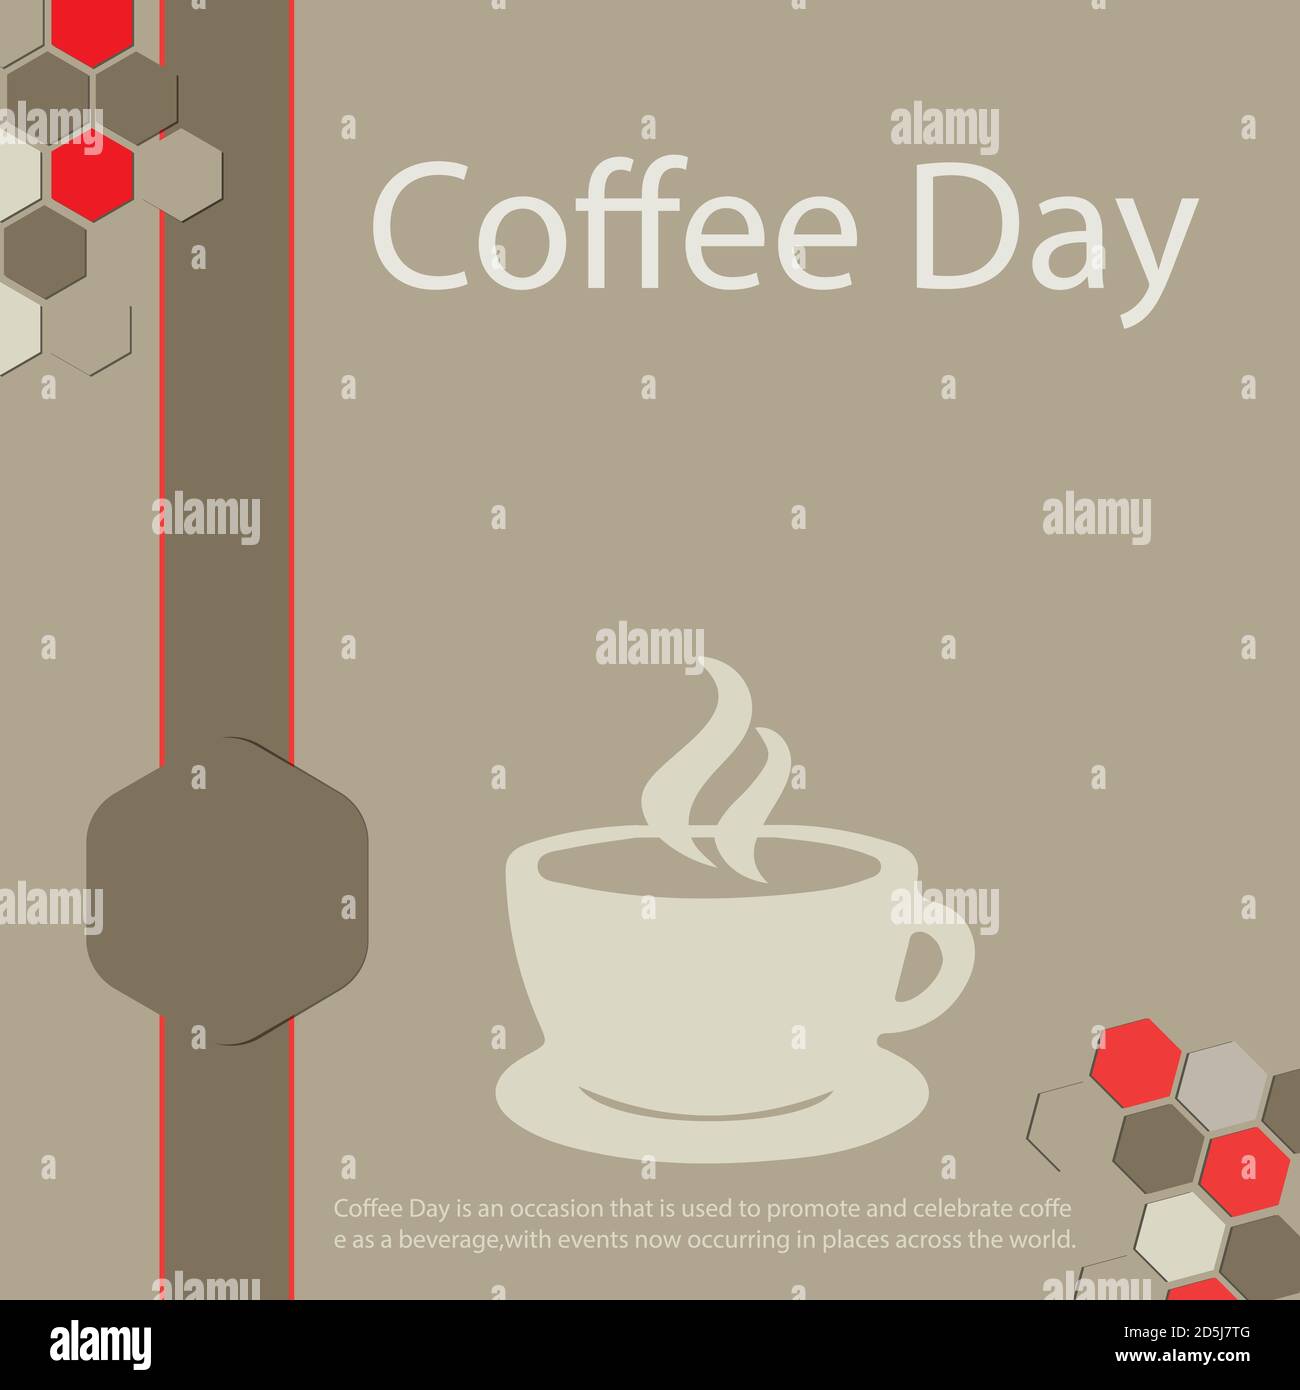 Coffee Day is an occasion that is used to promote and celebrate coffee as a beverage,with events now occurring in places across the world. Stock Vector